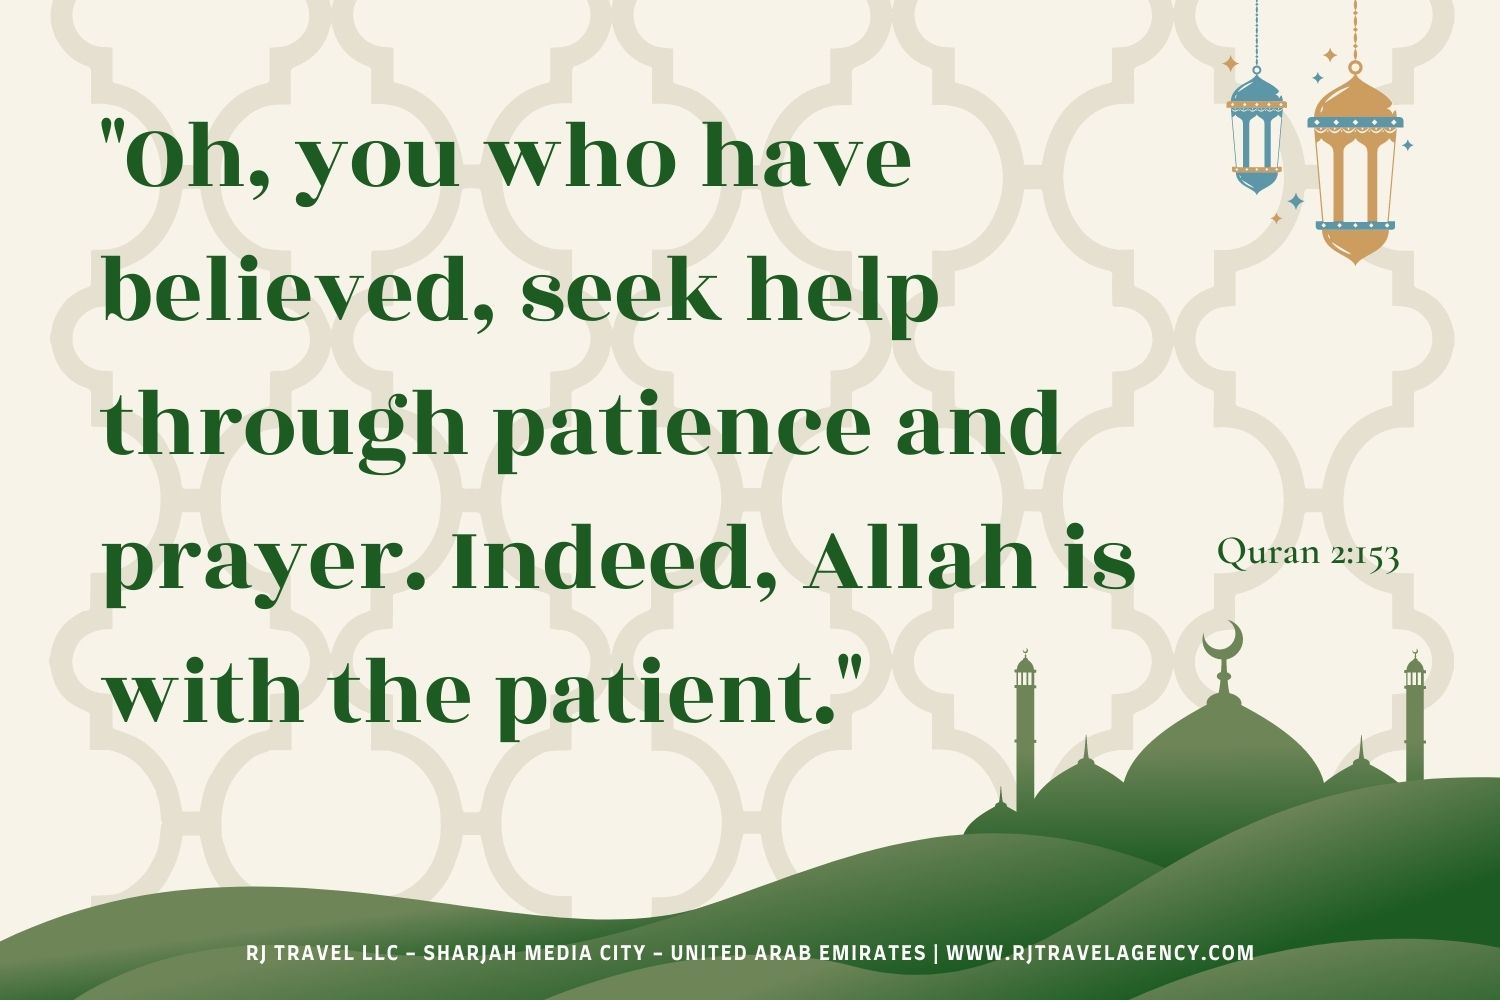 Quotes about patience in Islam